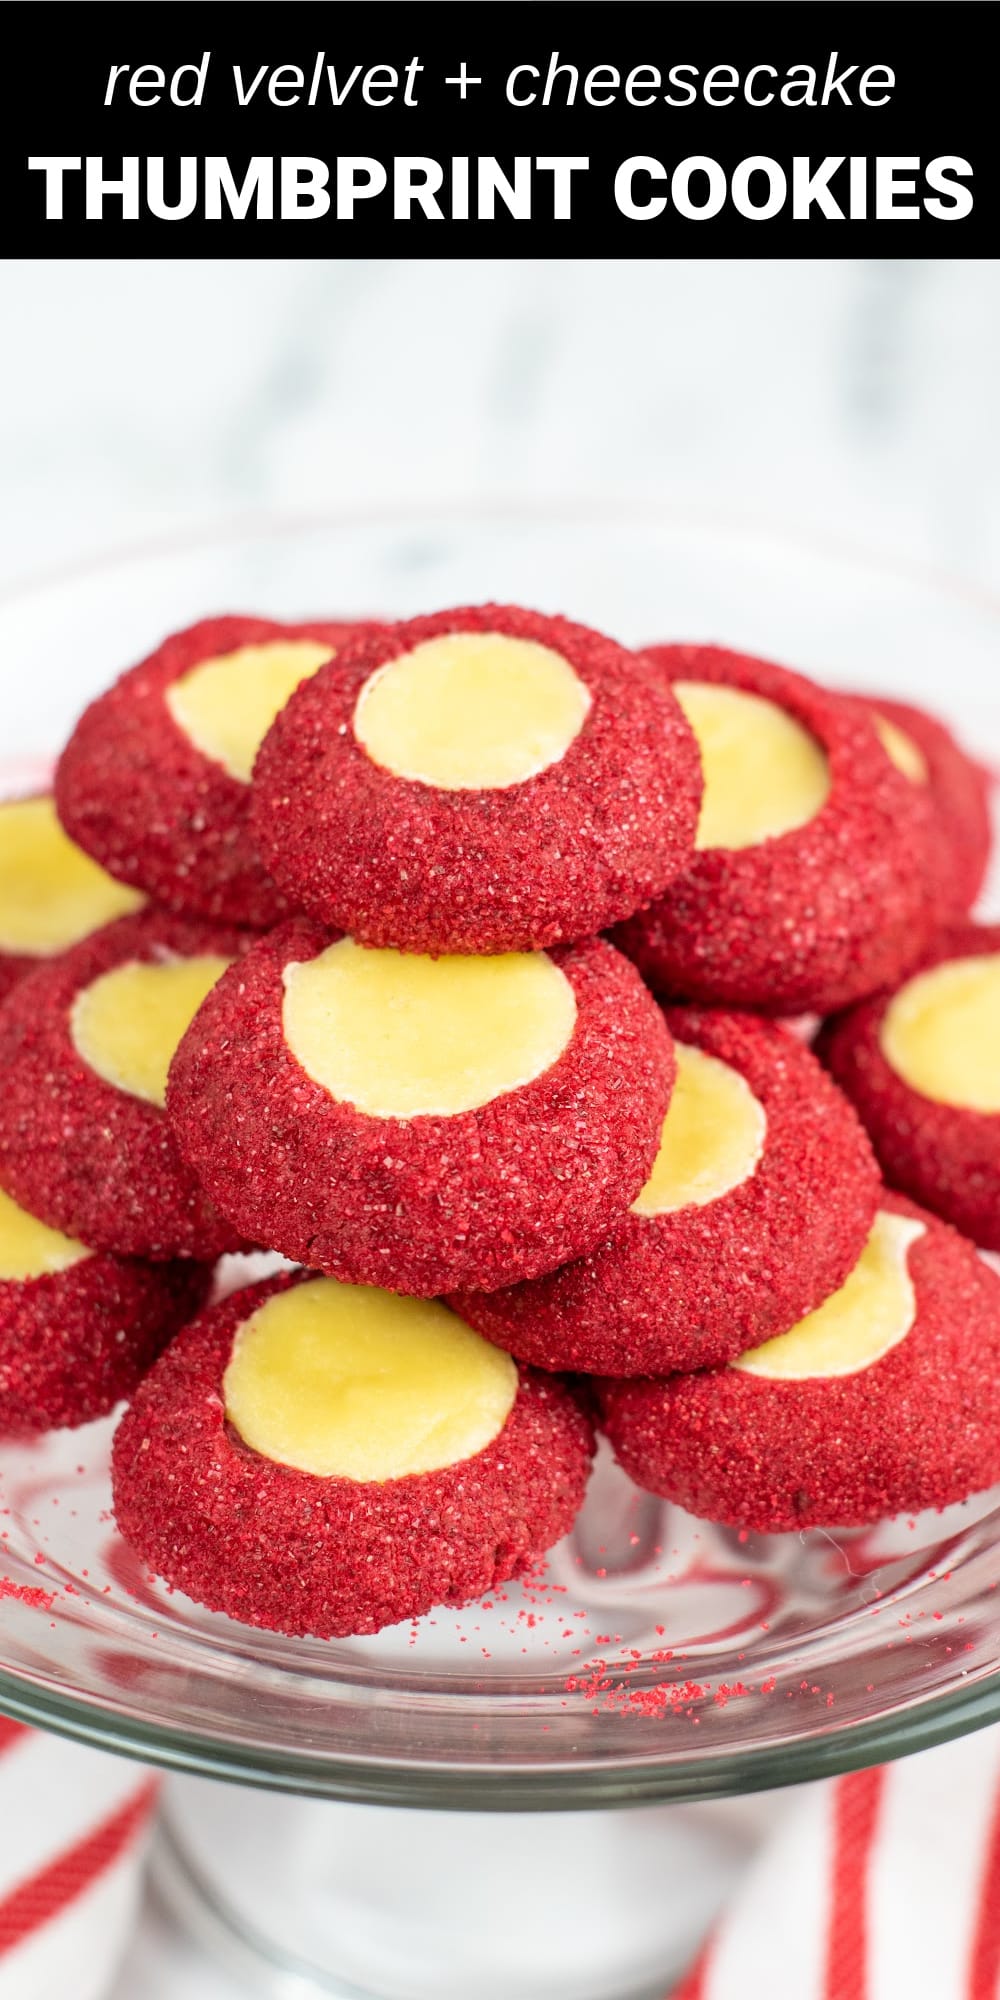 These from-scratch Red Velvet Thumbprint Cookies are soft and chewy, with a subtle hint of chocolate and sweet cream cheese center. 